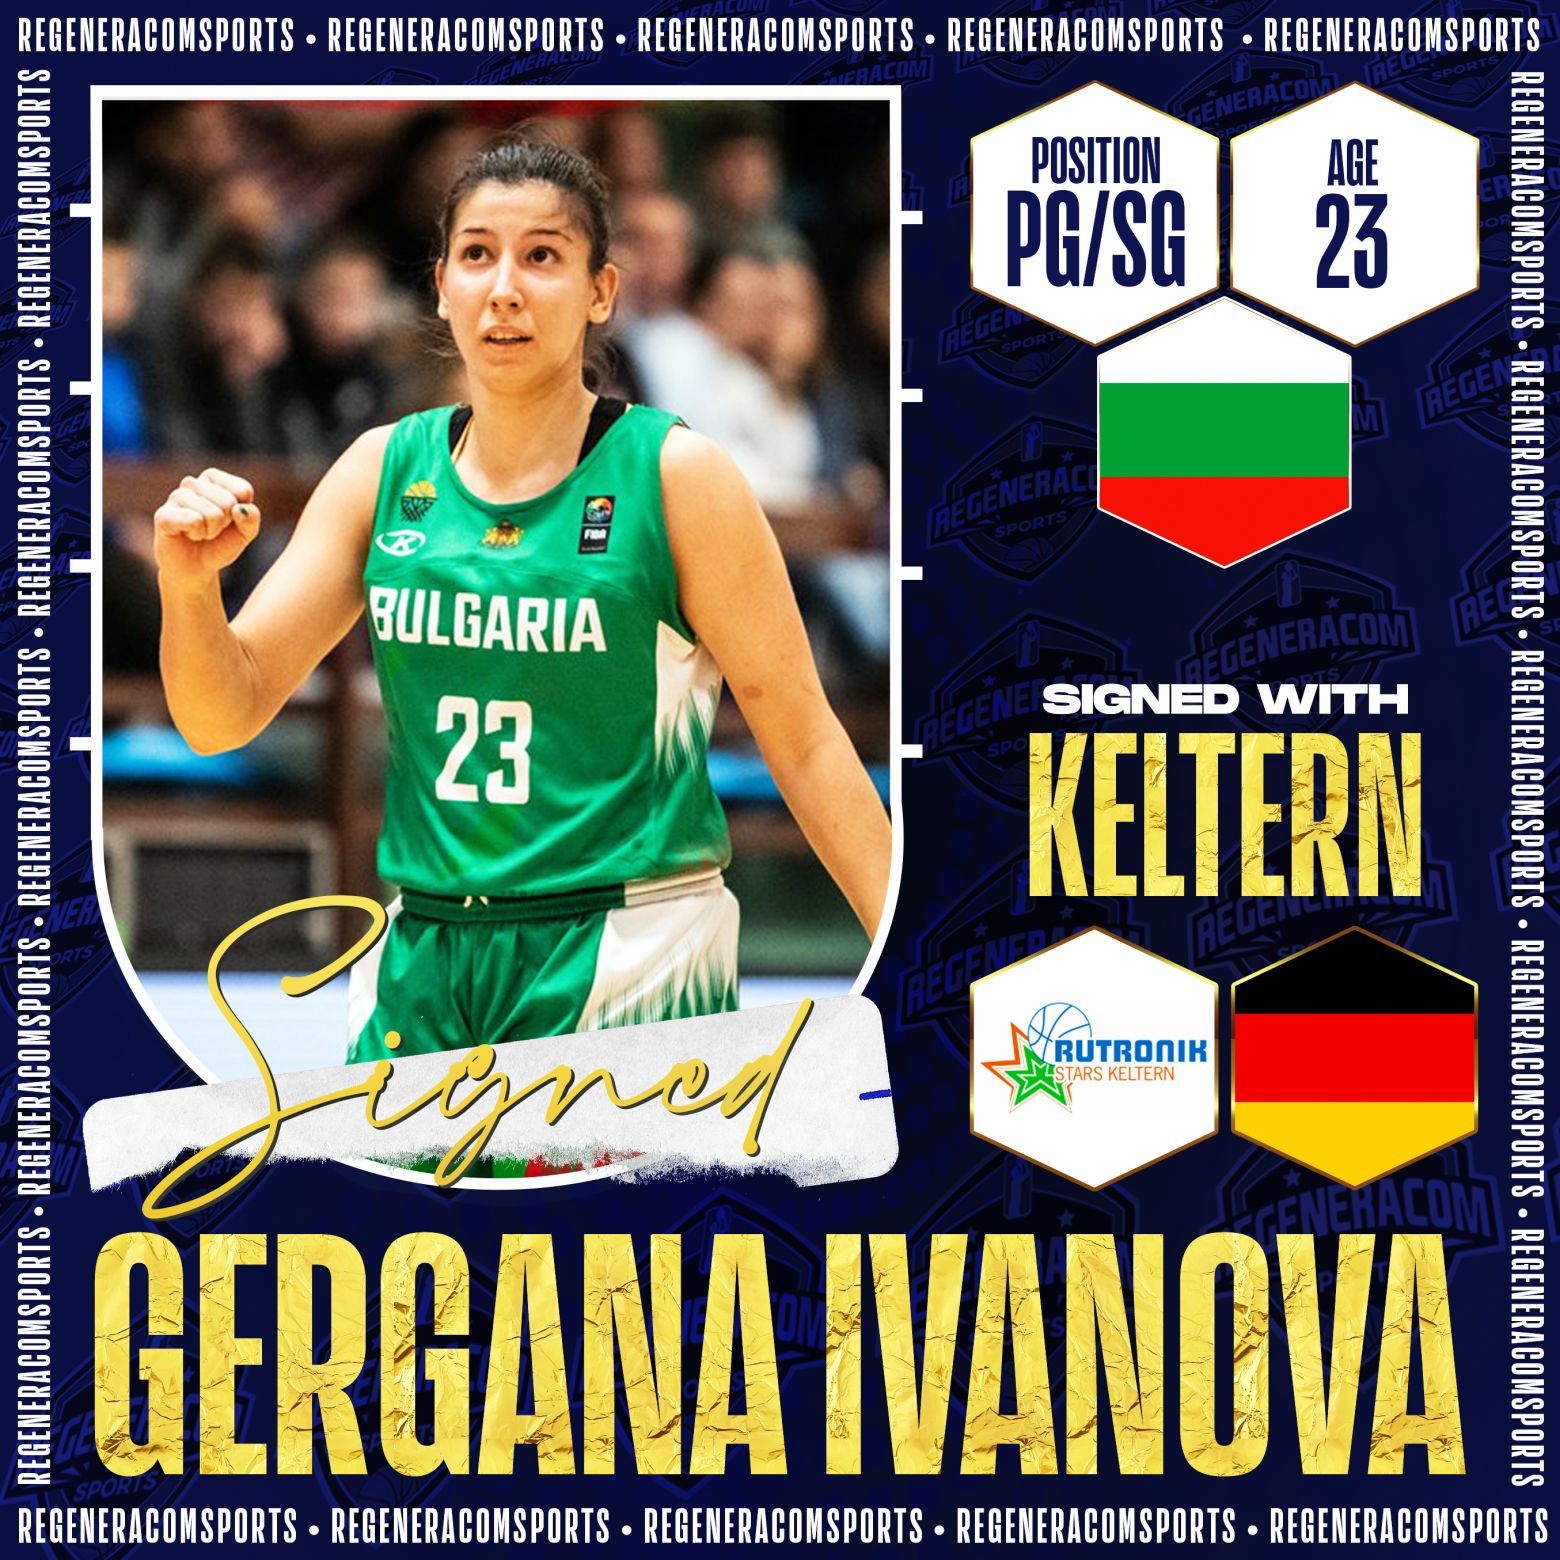 GERGANA IVANOVA has signed in Germany with Keltern until the end of the 2022/23 season